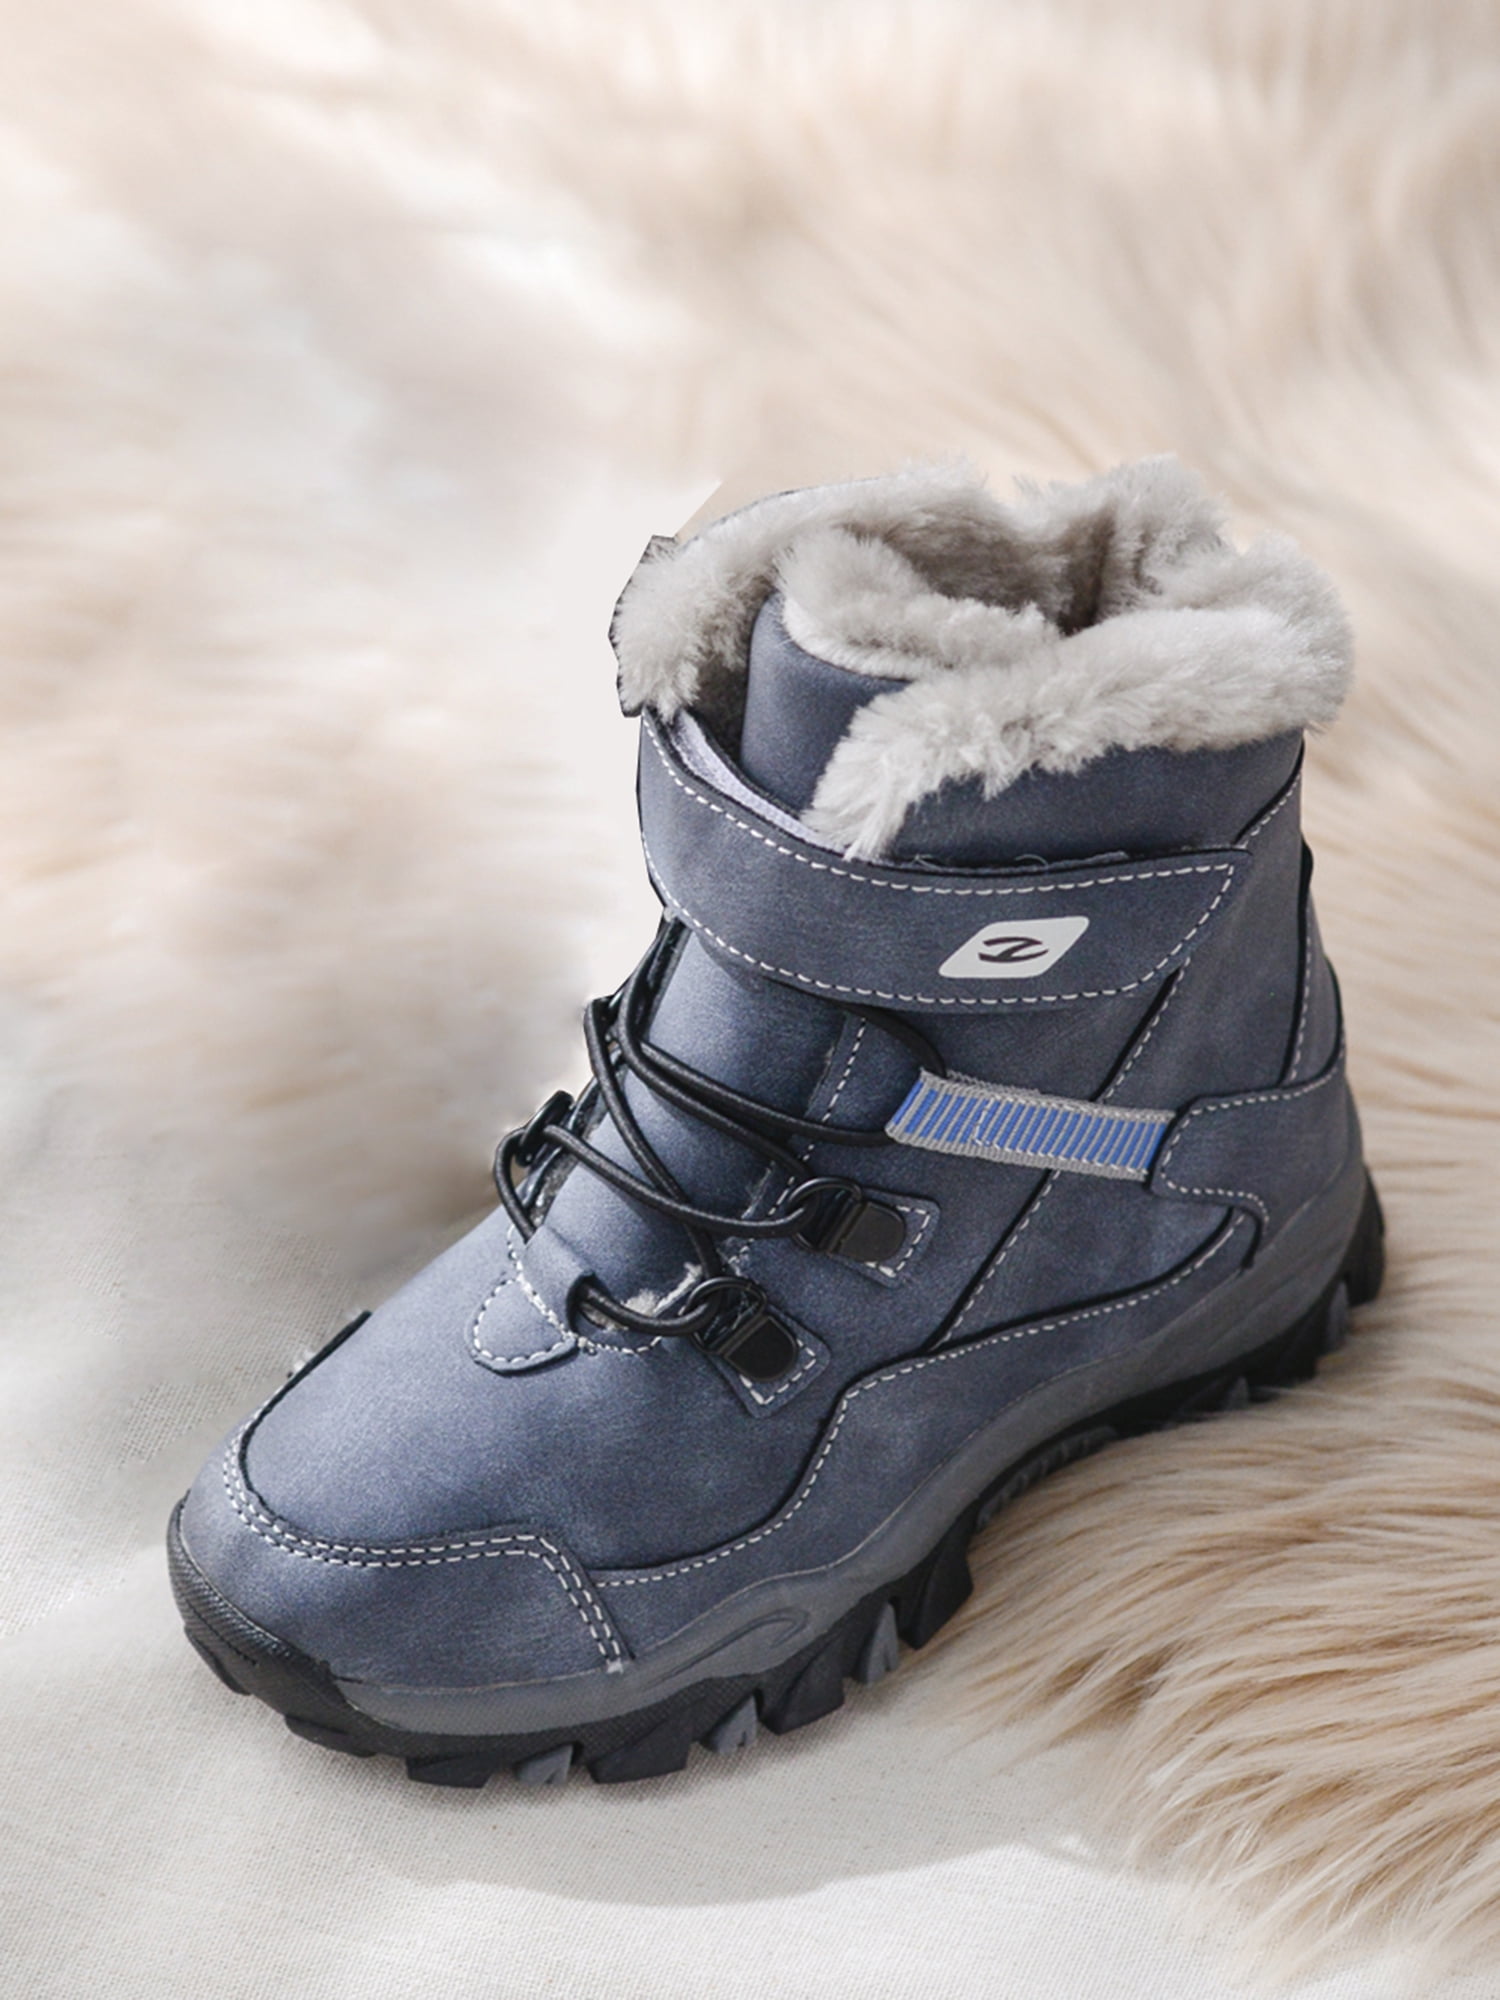 NEW BABY KIDS BOYS GIRLS FAUX LEATHER WINTER BOOTS ZIP LACES WARM FUR WALK SHOES 